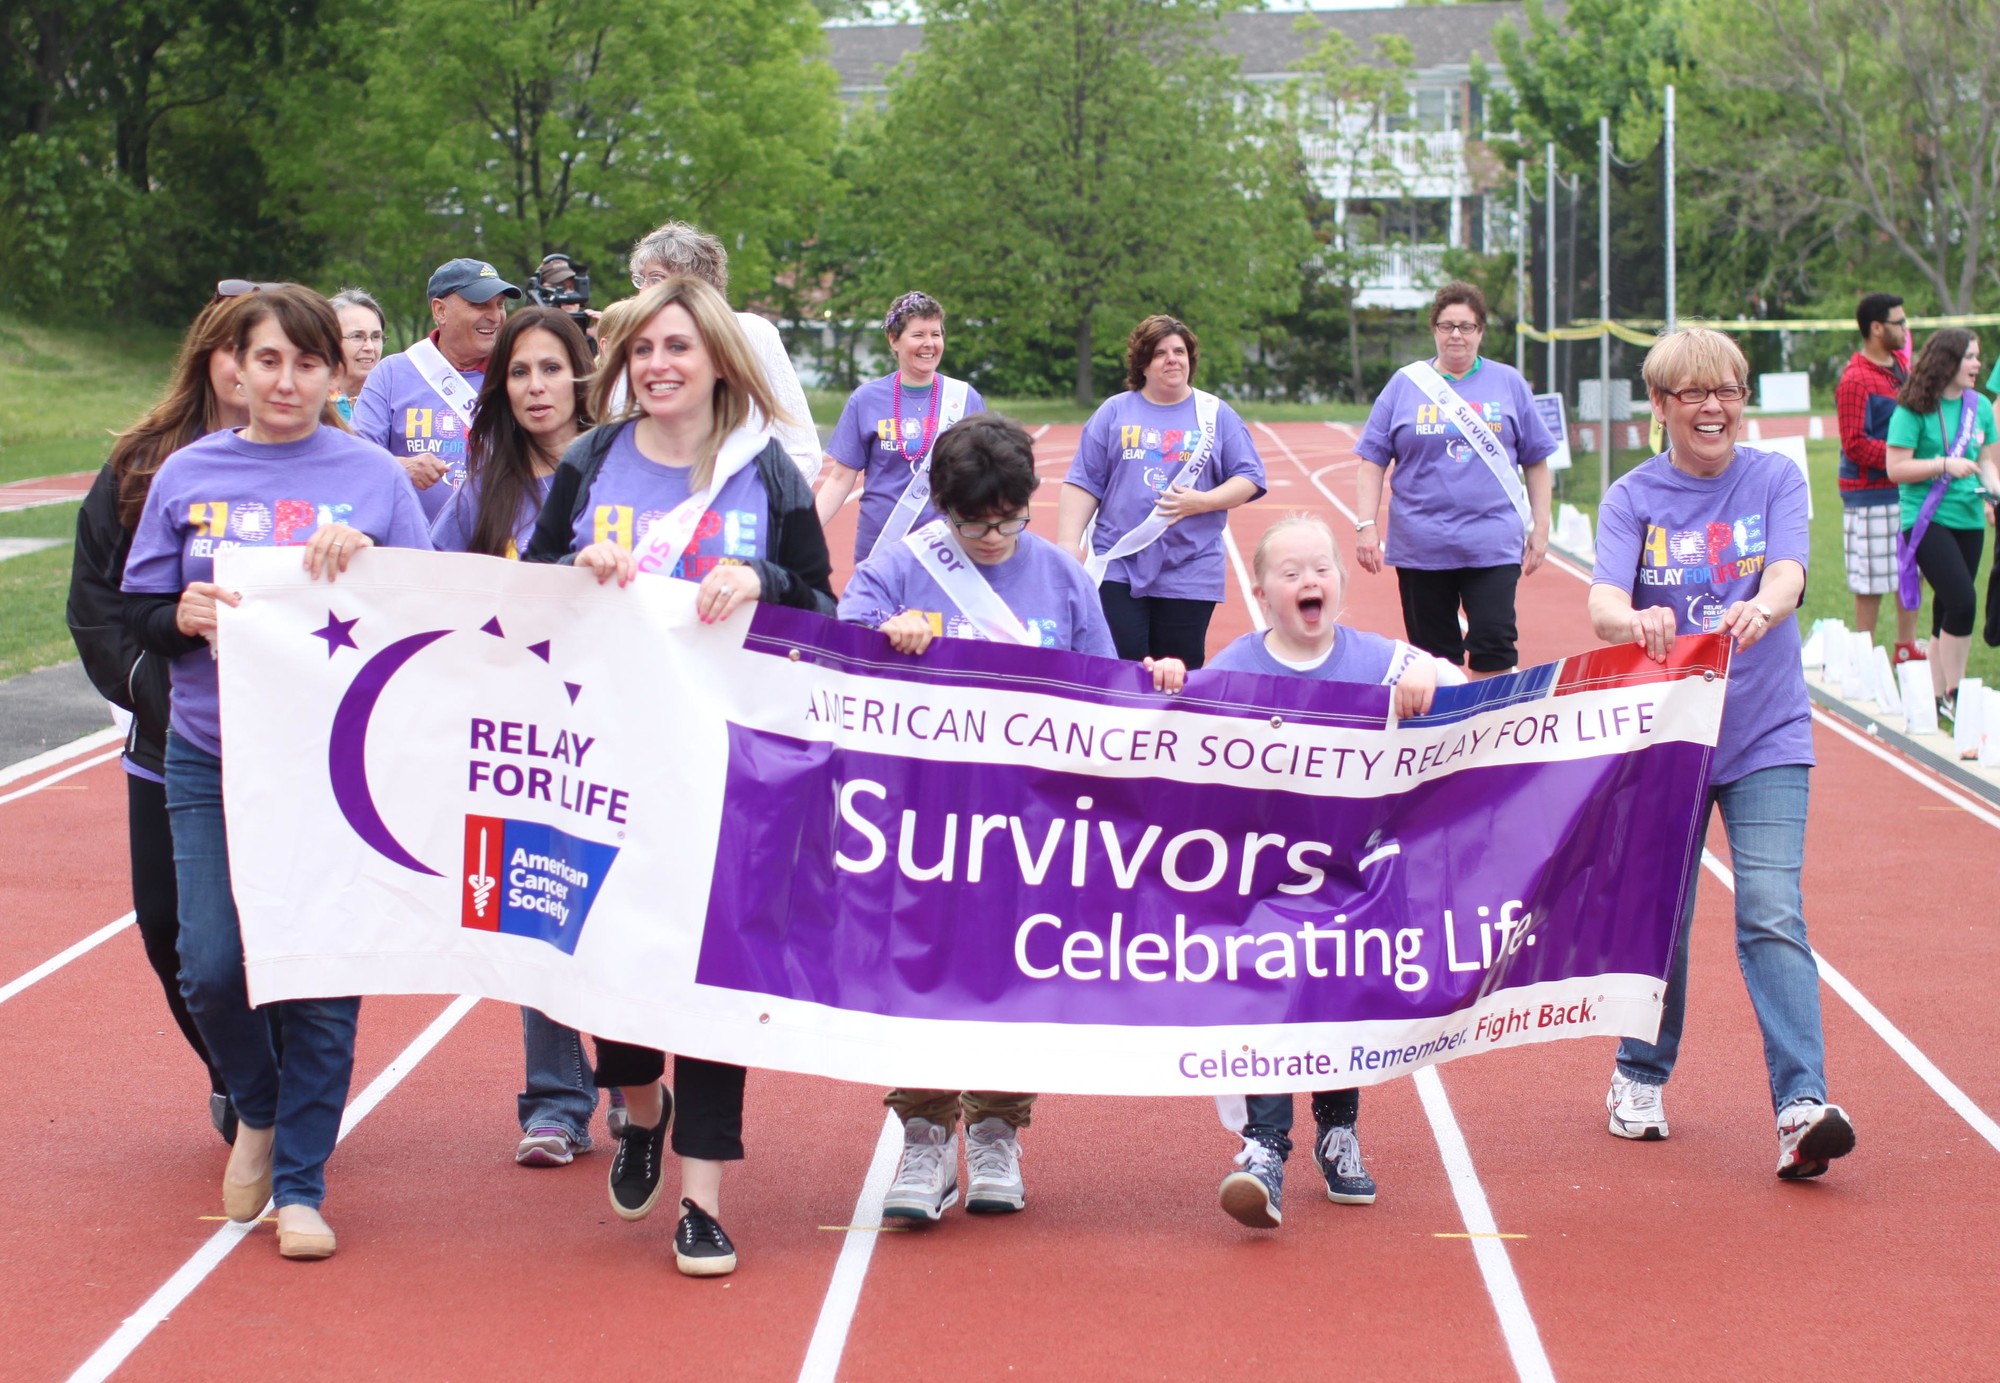 The survivors happily make their first lap around the track at Lynbrook's South Middle School.